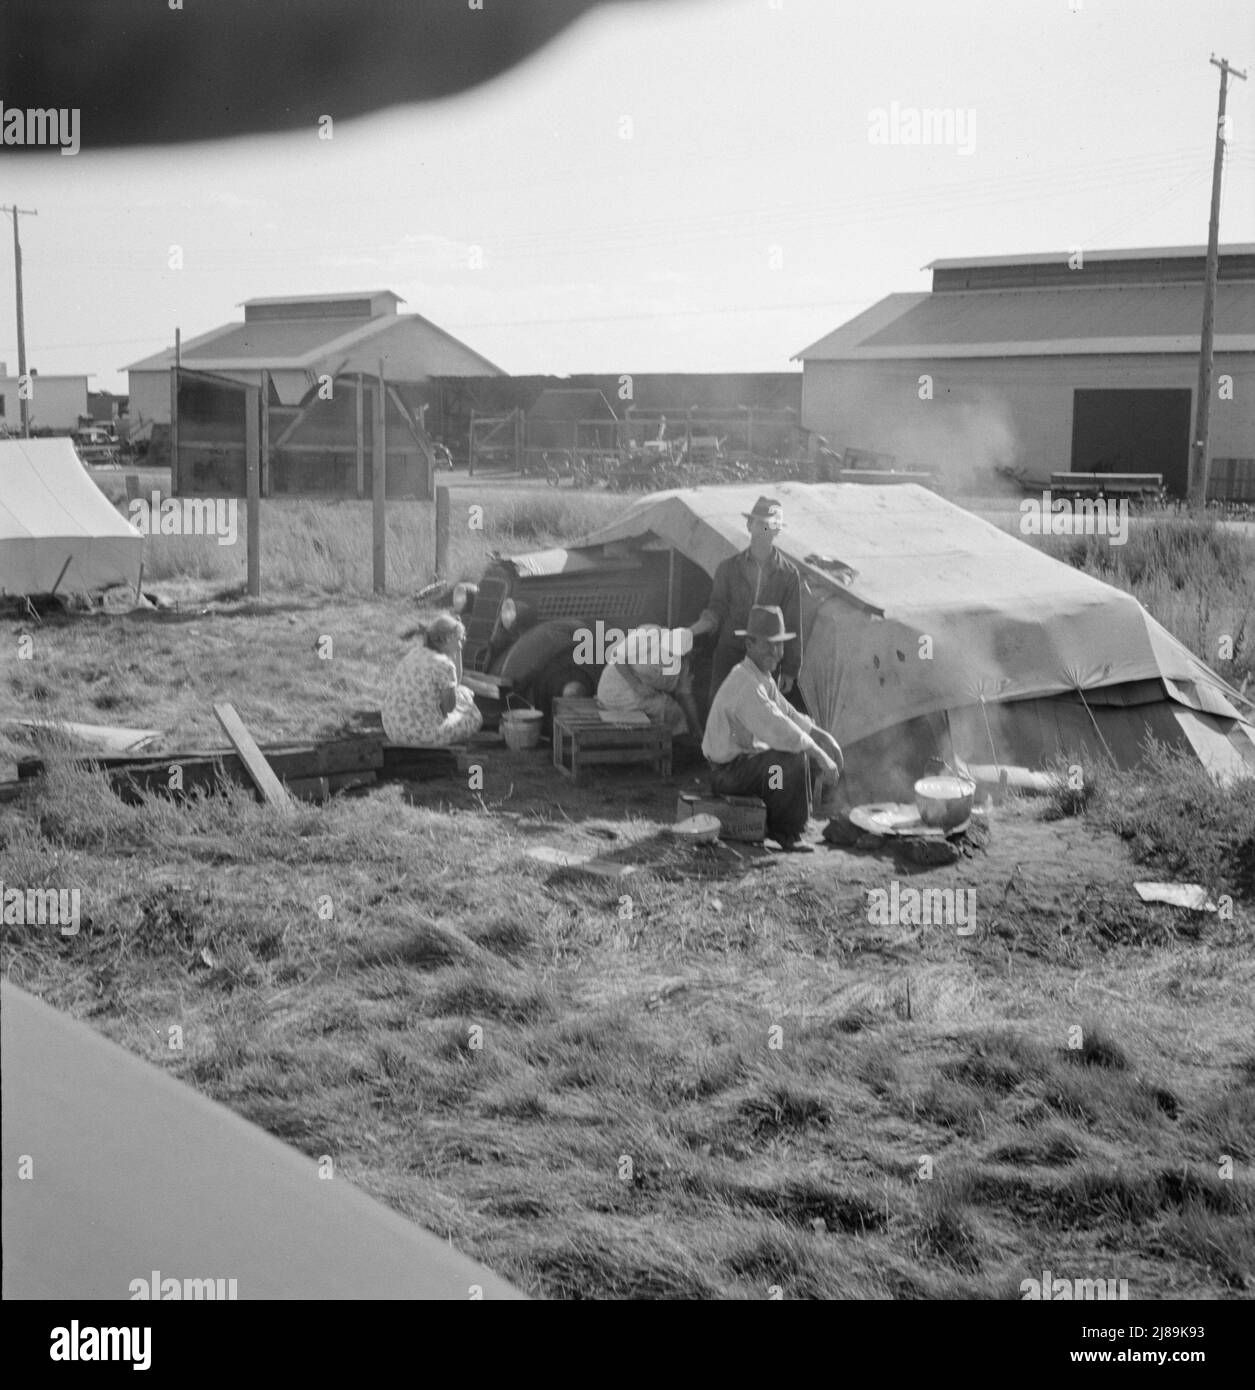 Living conditions for migrant potato pickers. Note potato sheds across the road. Siskiyou County, California. Stock Photo